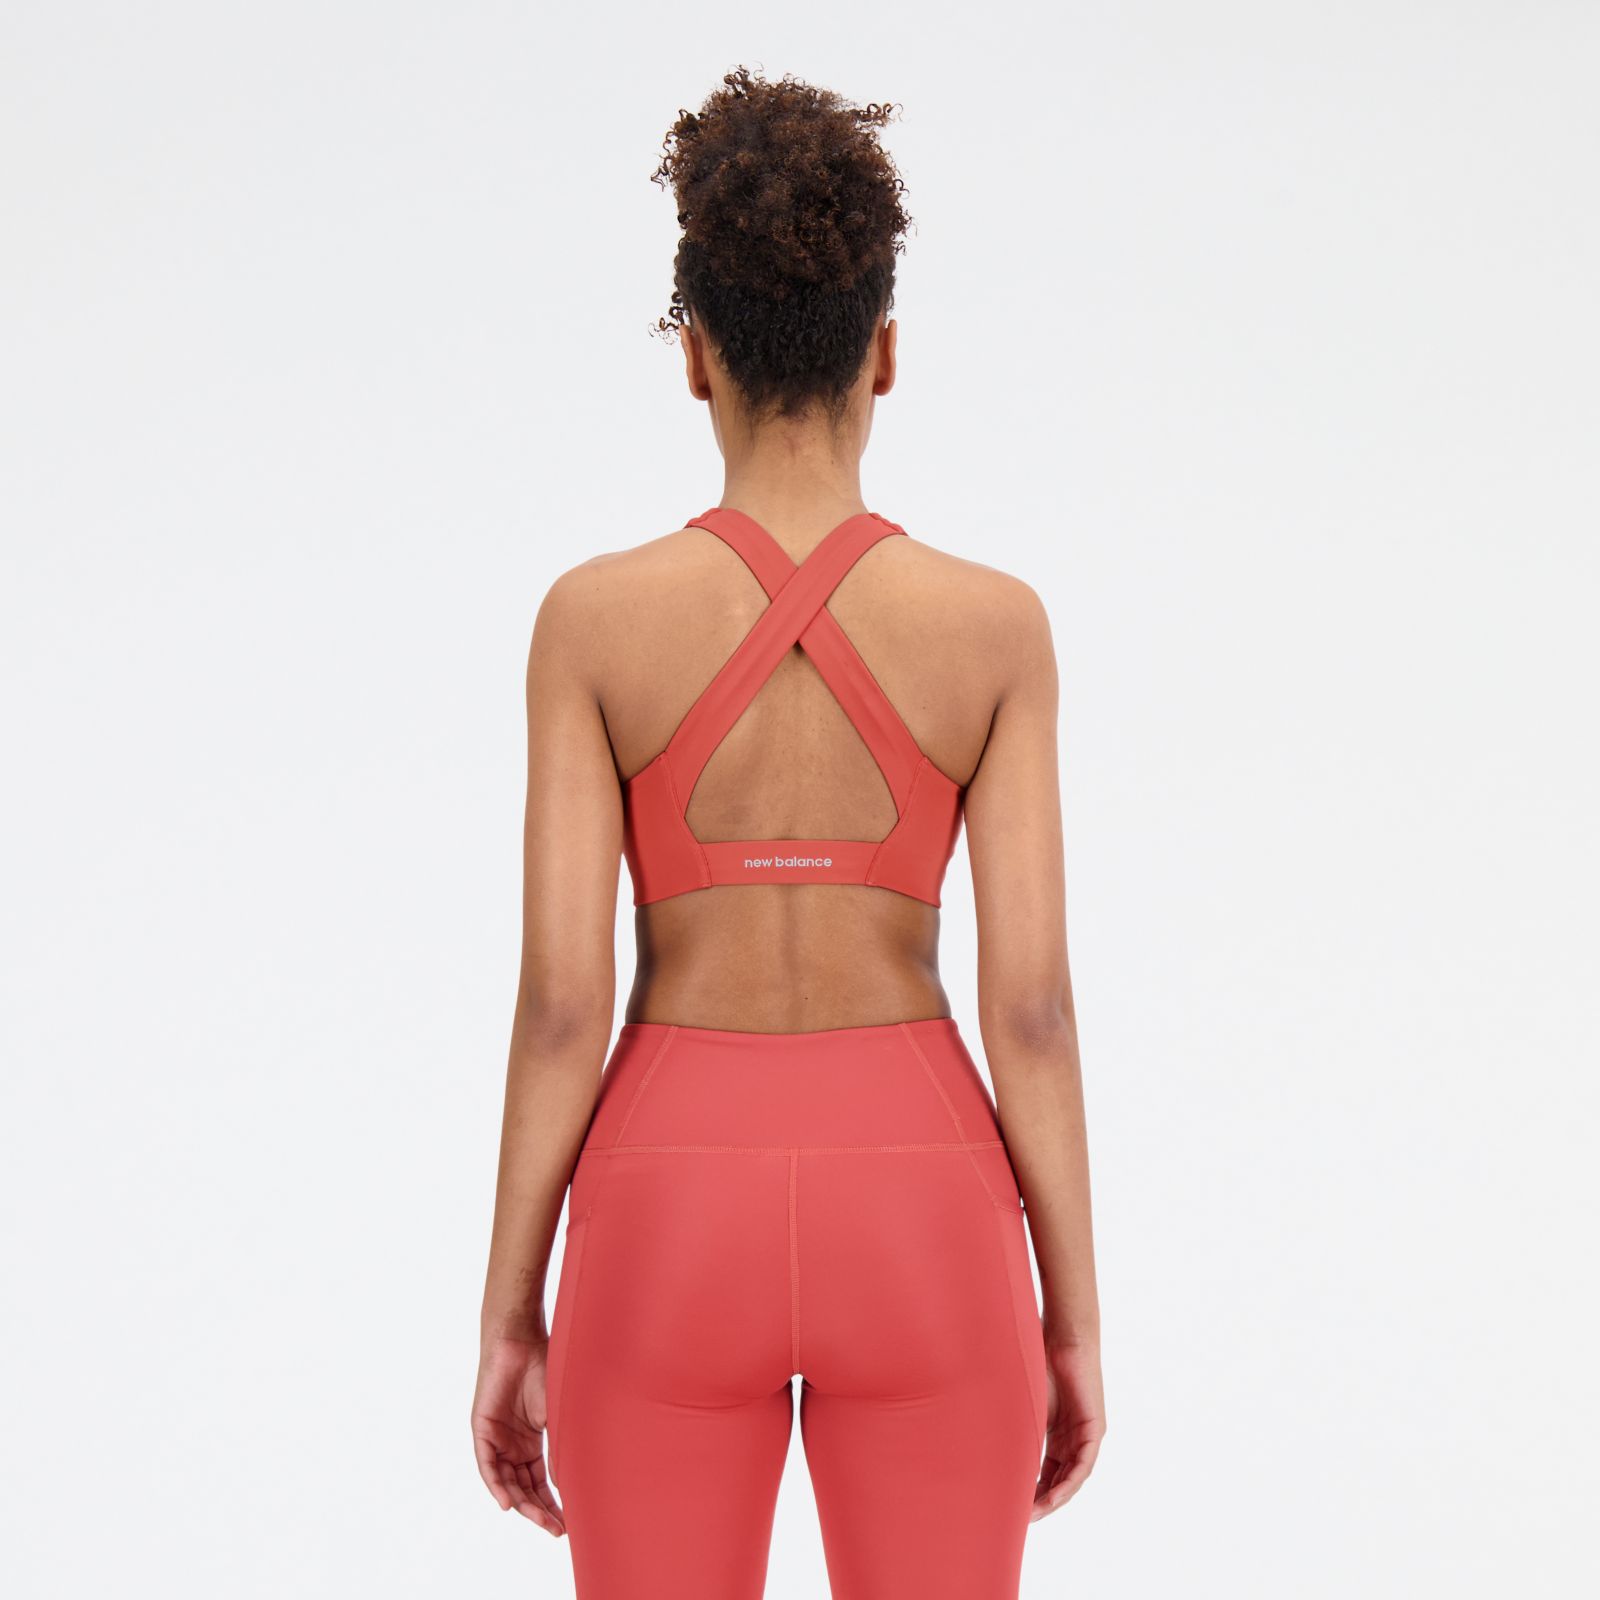 New Balance Polyester Sports Bras for Women